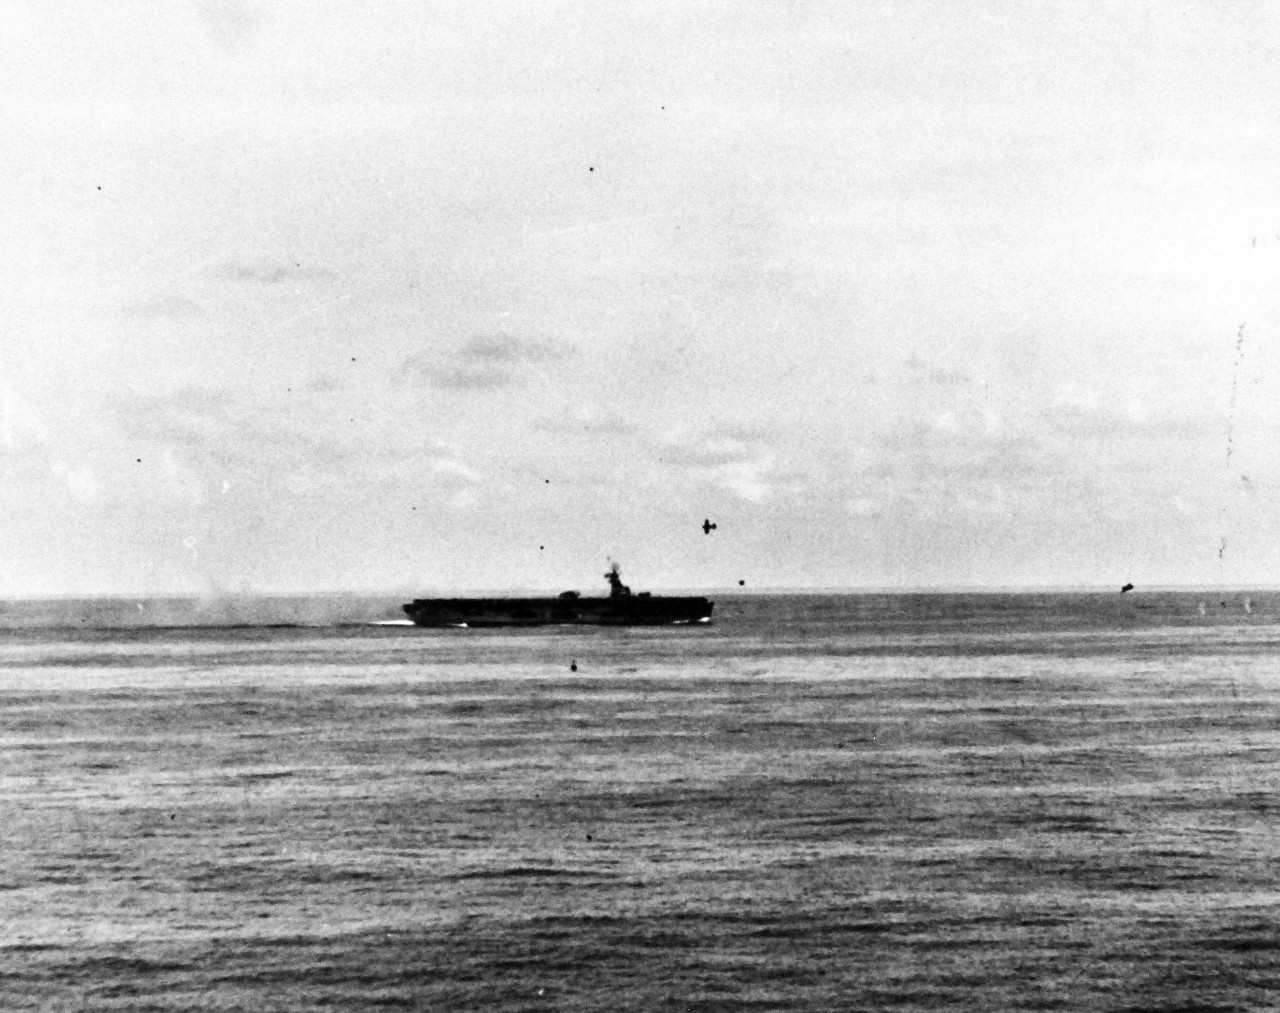 80-G-270665:  USS Sangamon (CVE-26), October 25, 1944.  Two Japanese “Zero” aircraft making suicide attacks on USS Sangamon (CVE-26) off Leyte Gulf, Philippines, as seen from USS Suwannee (CVL-27).  One Japanese near miss near bow.  Trailing Japanese turned away and was shot down by our fighters. Official U.S. Navy Photograph, now in the collections of the National Archives.  